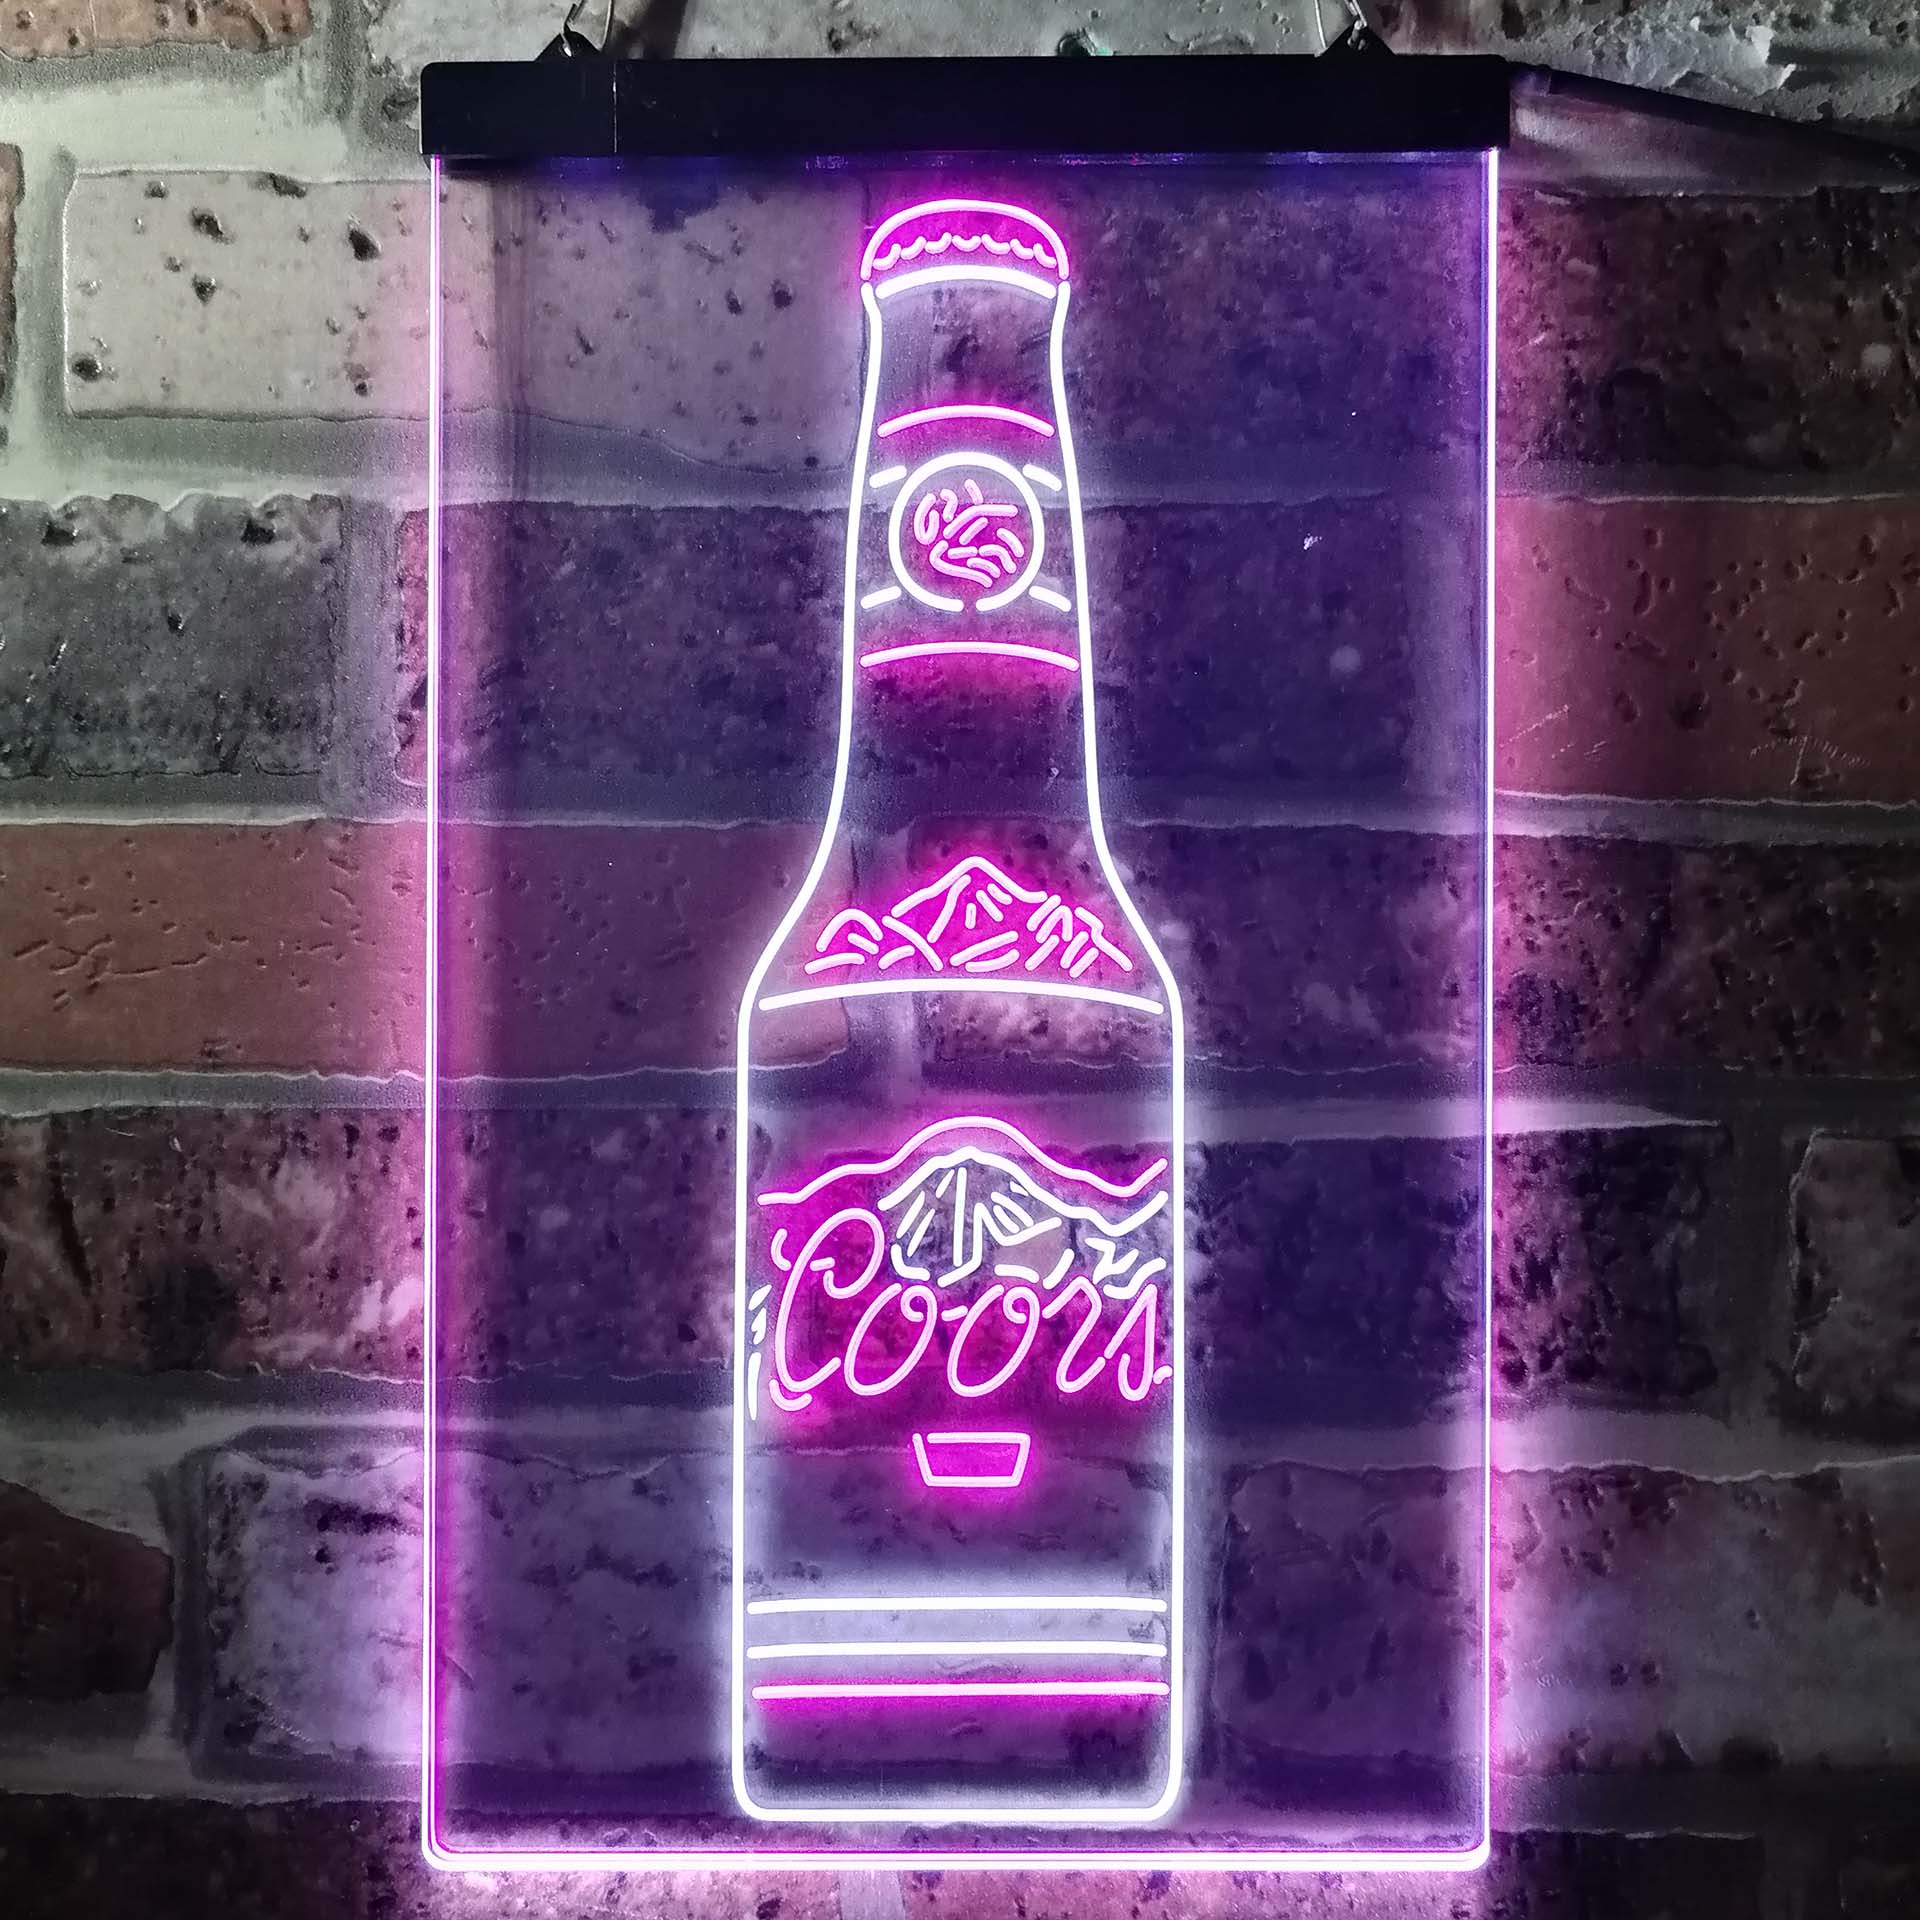 Coors Bottle Neon LED Sign